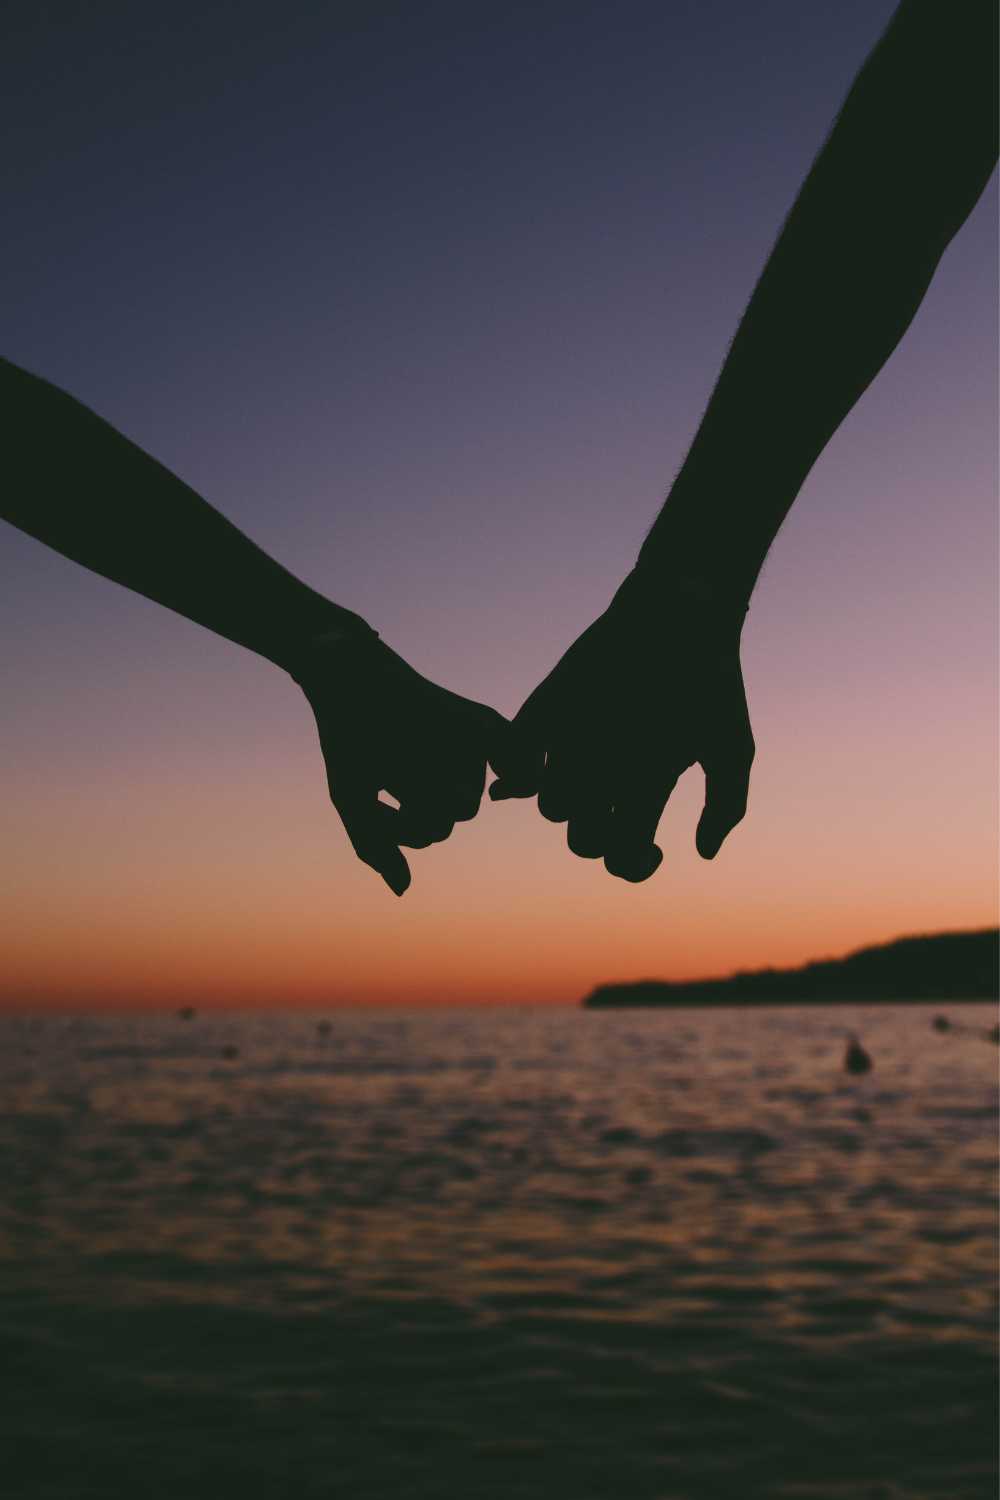 connect with your partner, holding hands